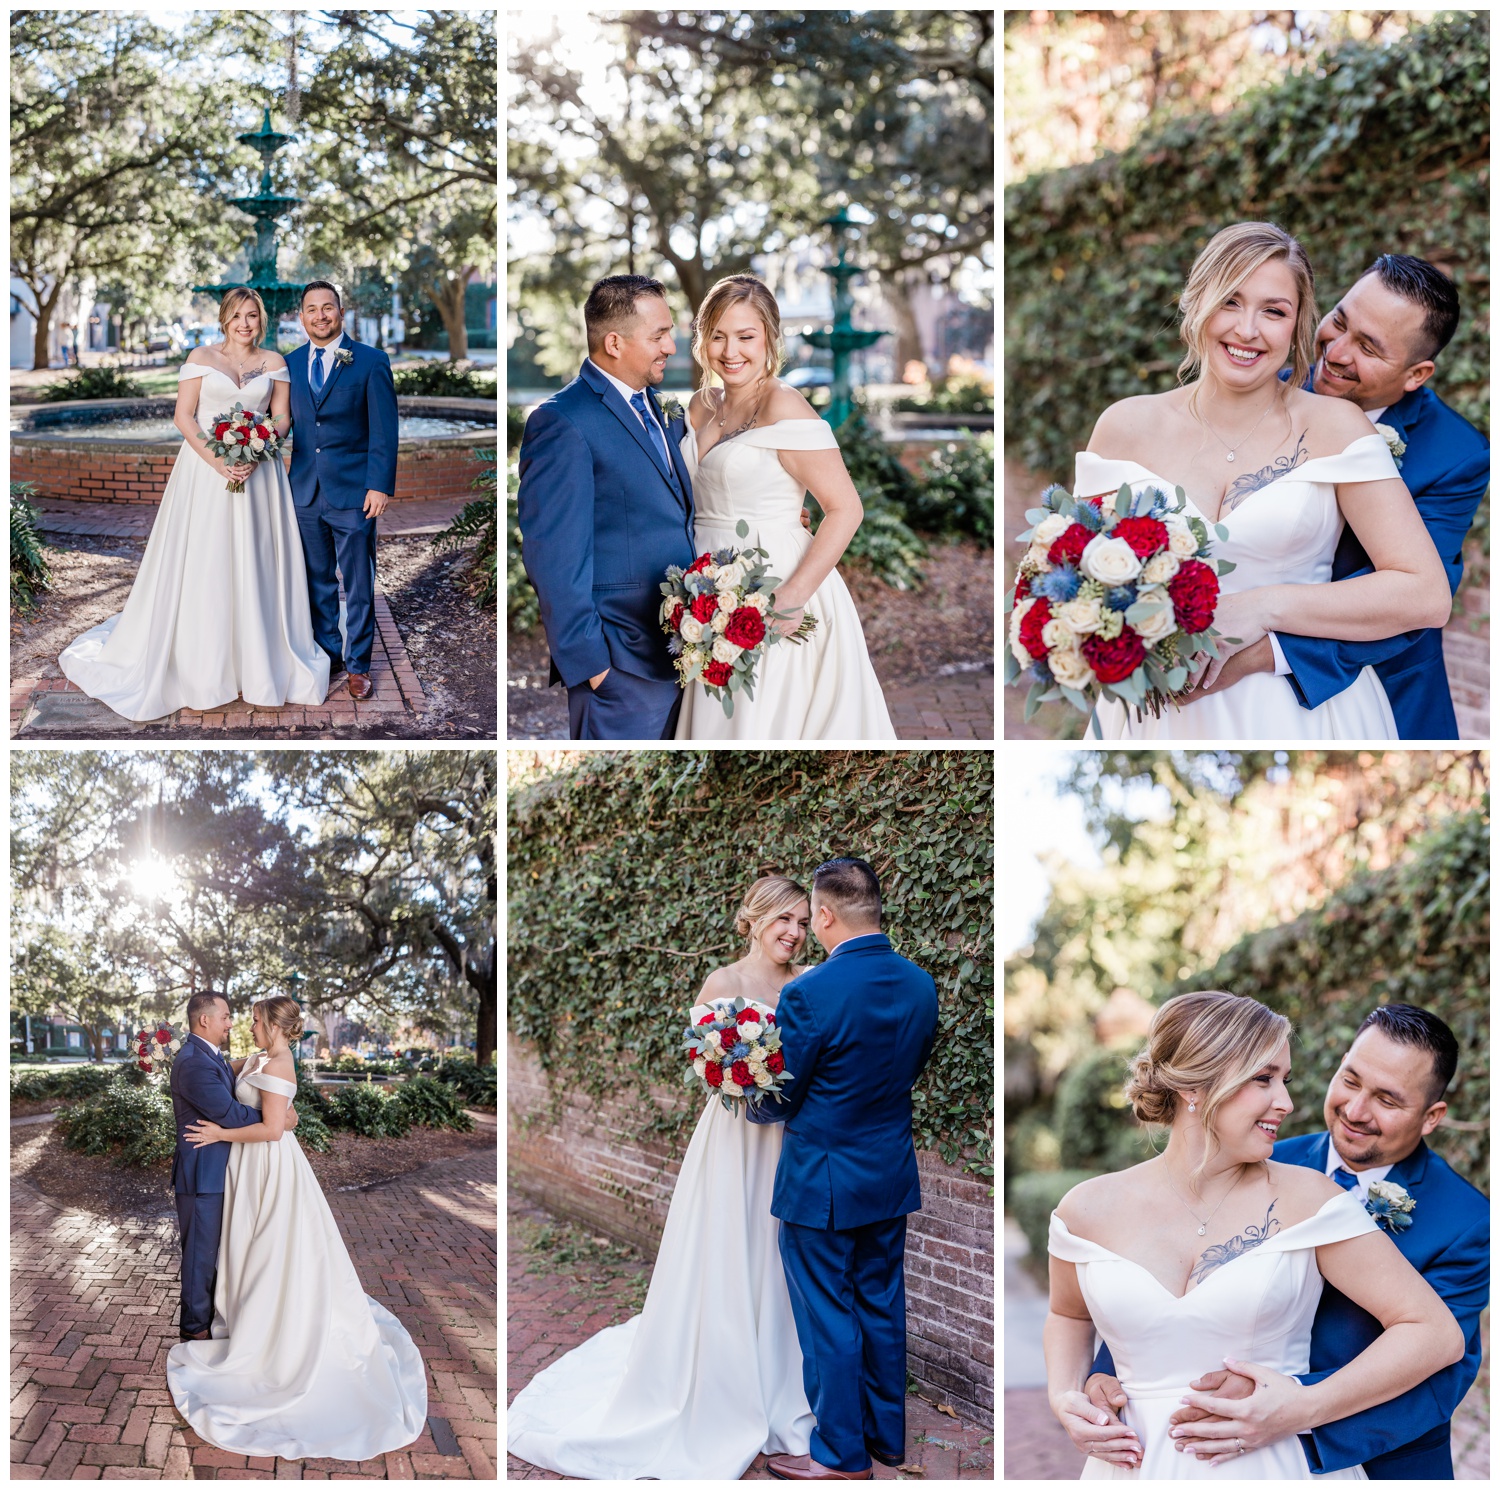 Elopement at Lafayette Square - flowers by ivory and beau - hair and makeup by Royal makeup and hair